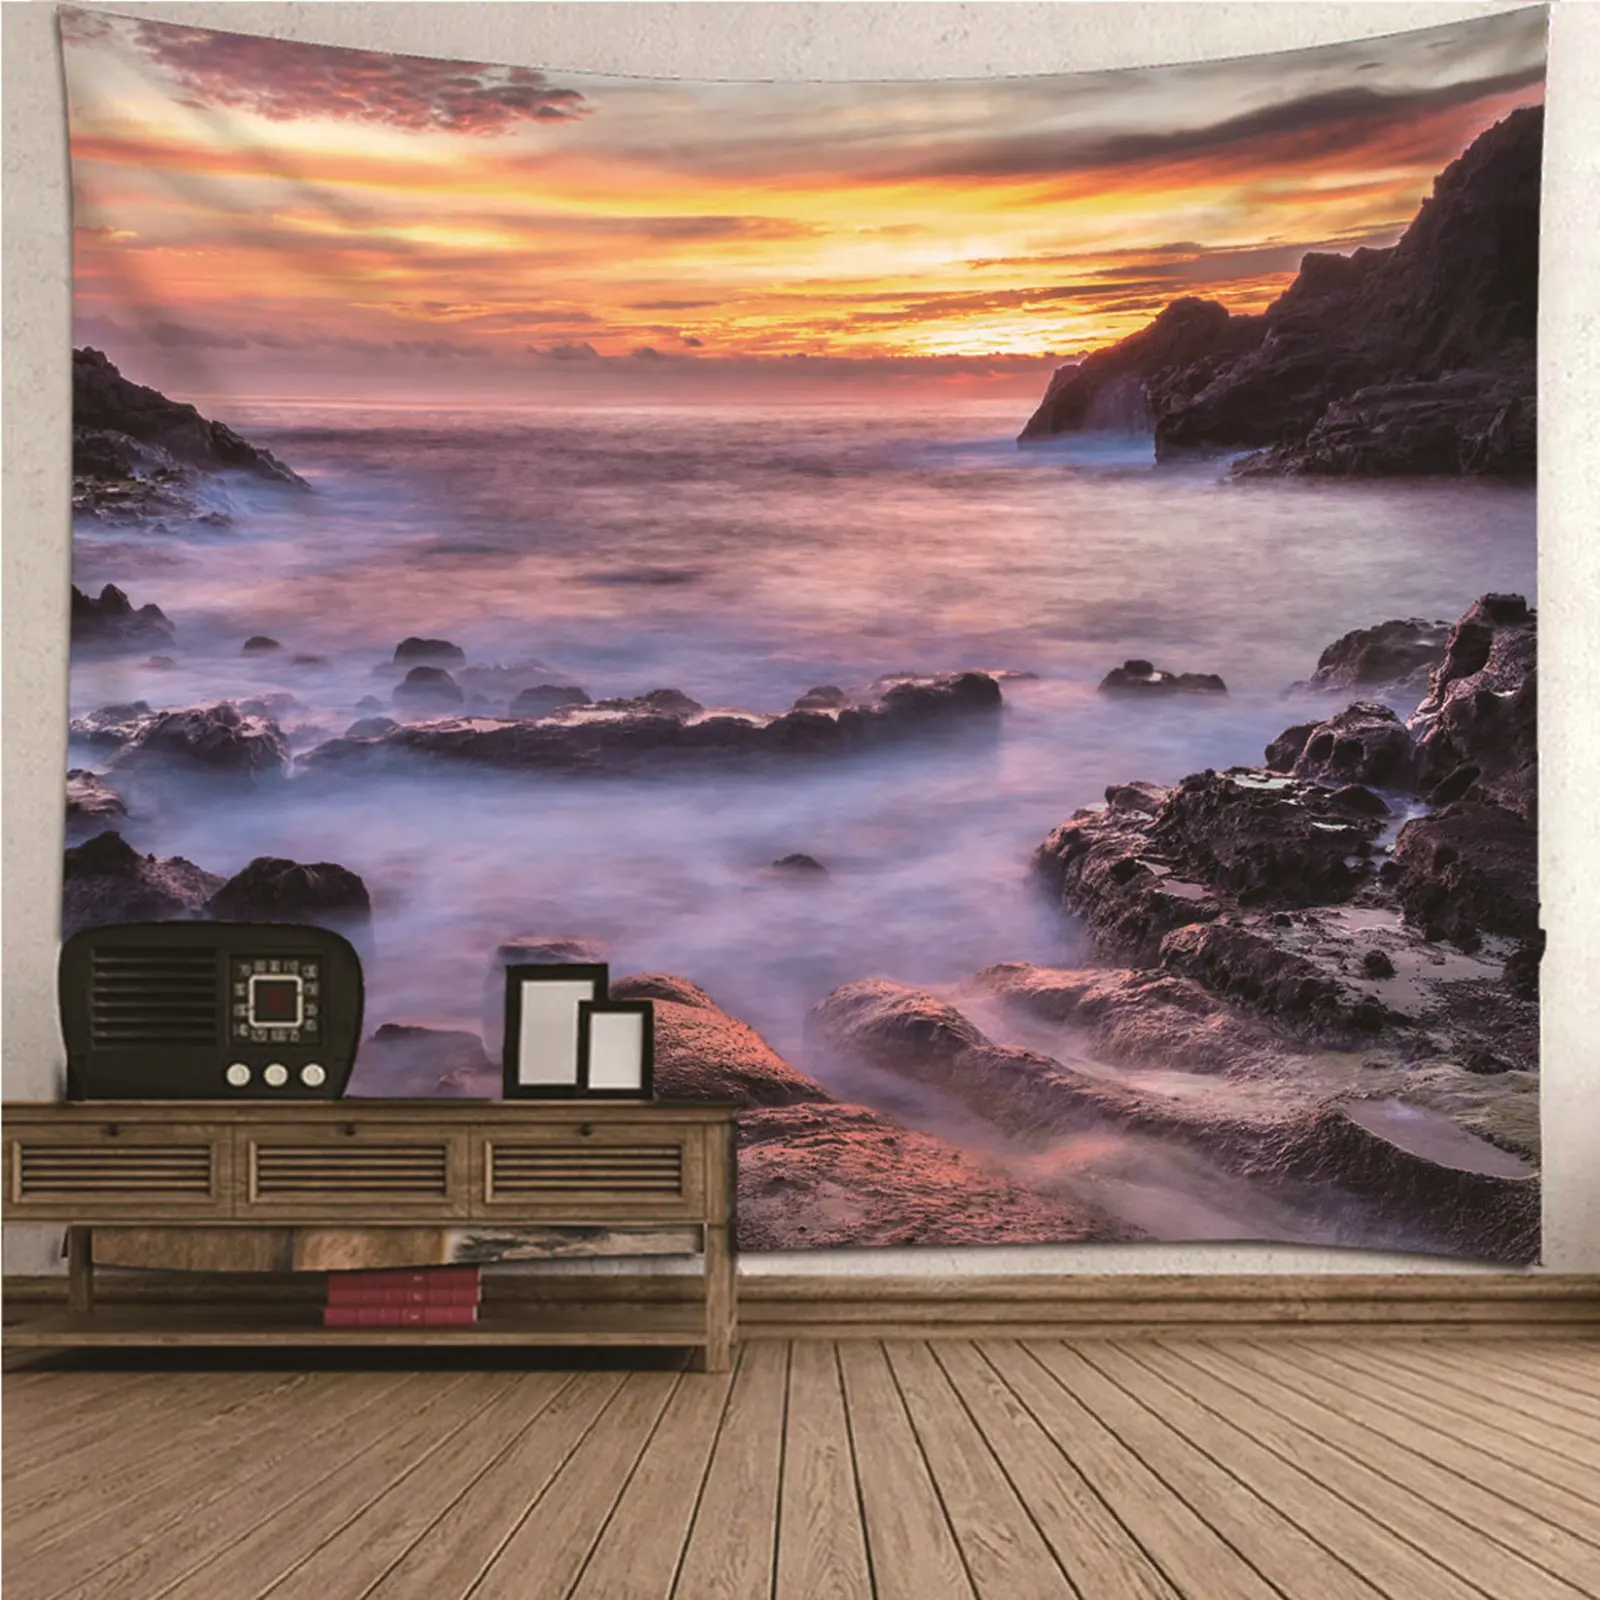 

Art Tapestry Tapestry Wall Decor natural scenery Sunset & Mountains Wall Hanging Blanket Dorm Art Decor Covering